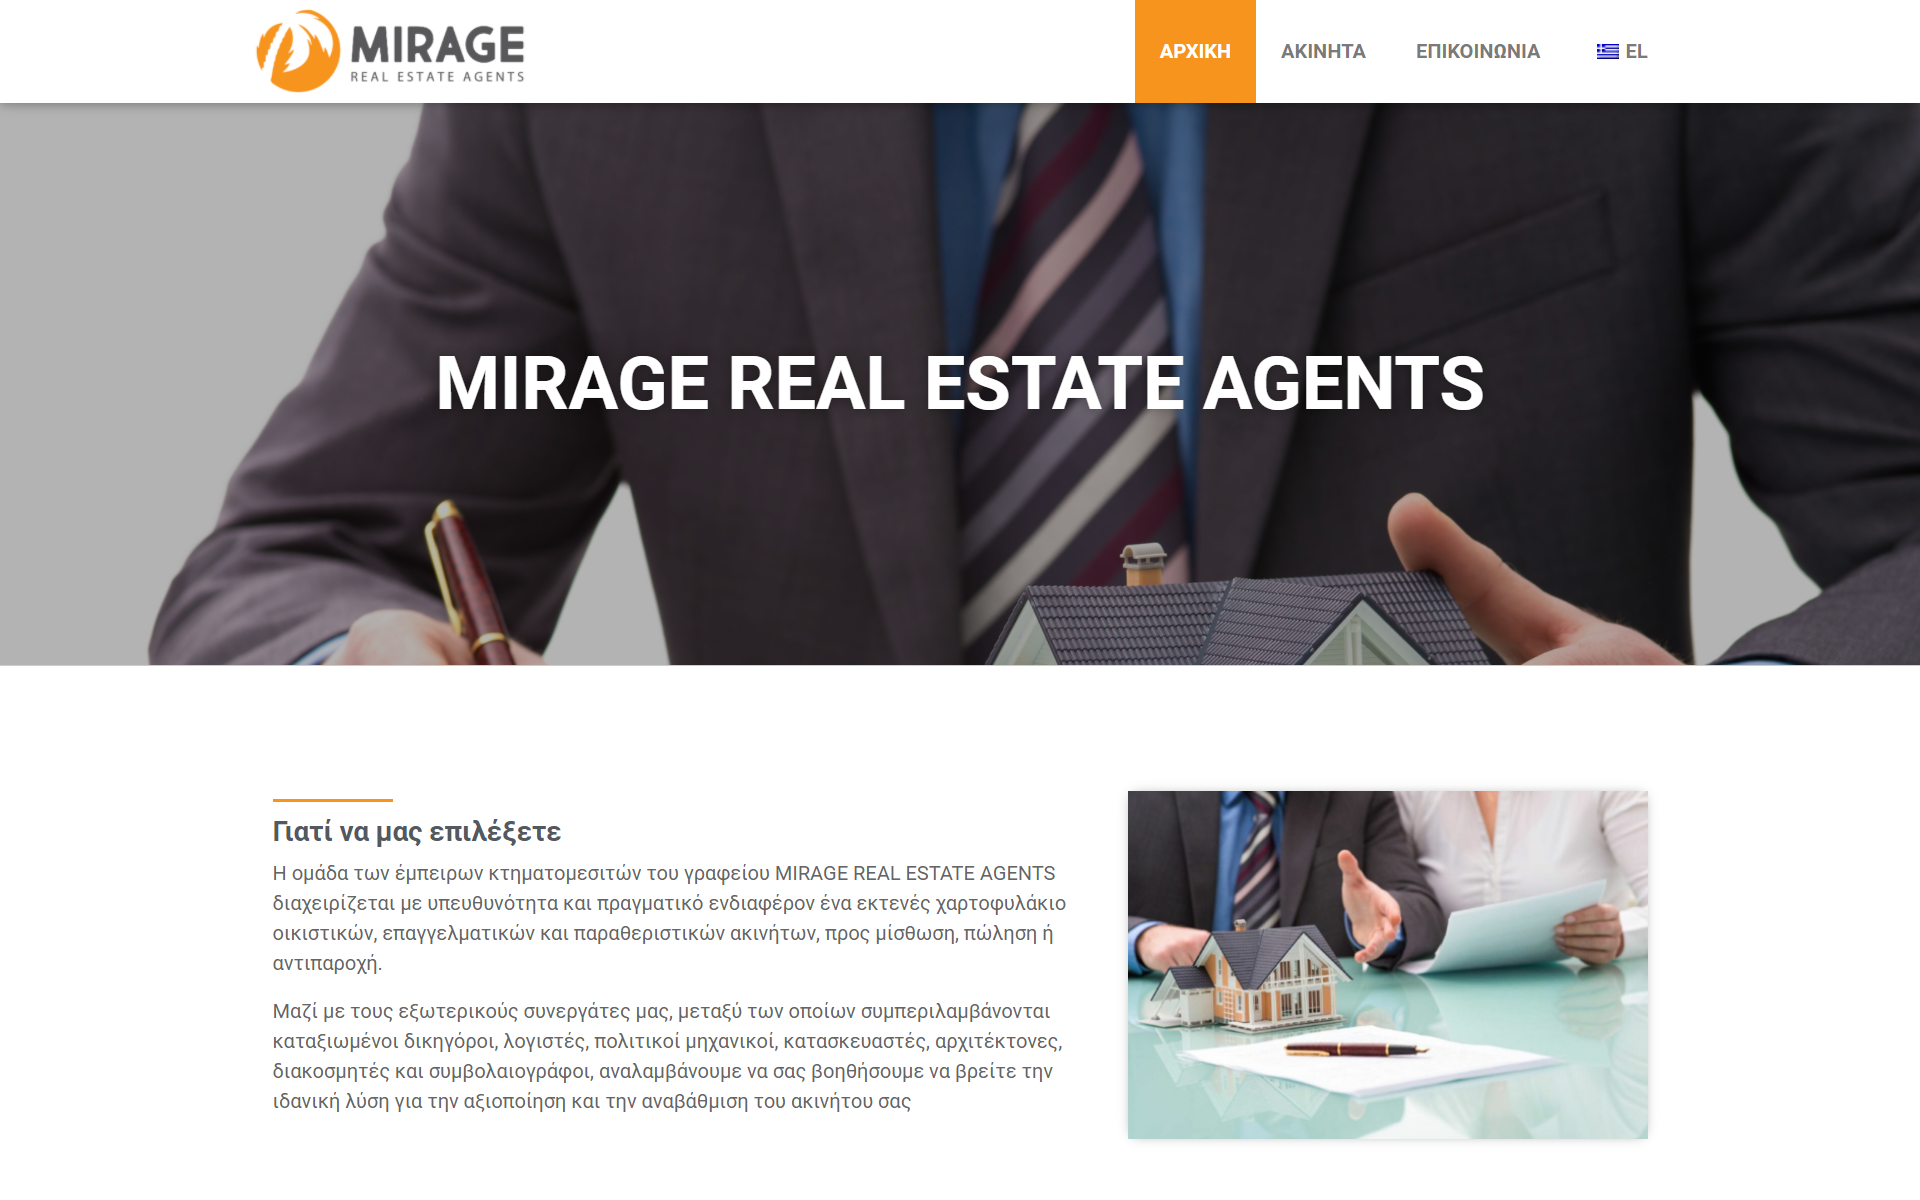 Mirage Real Estate Agents